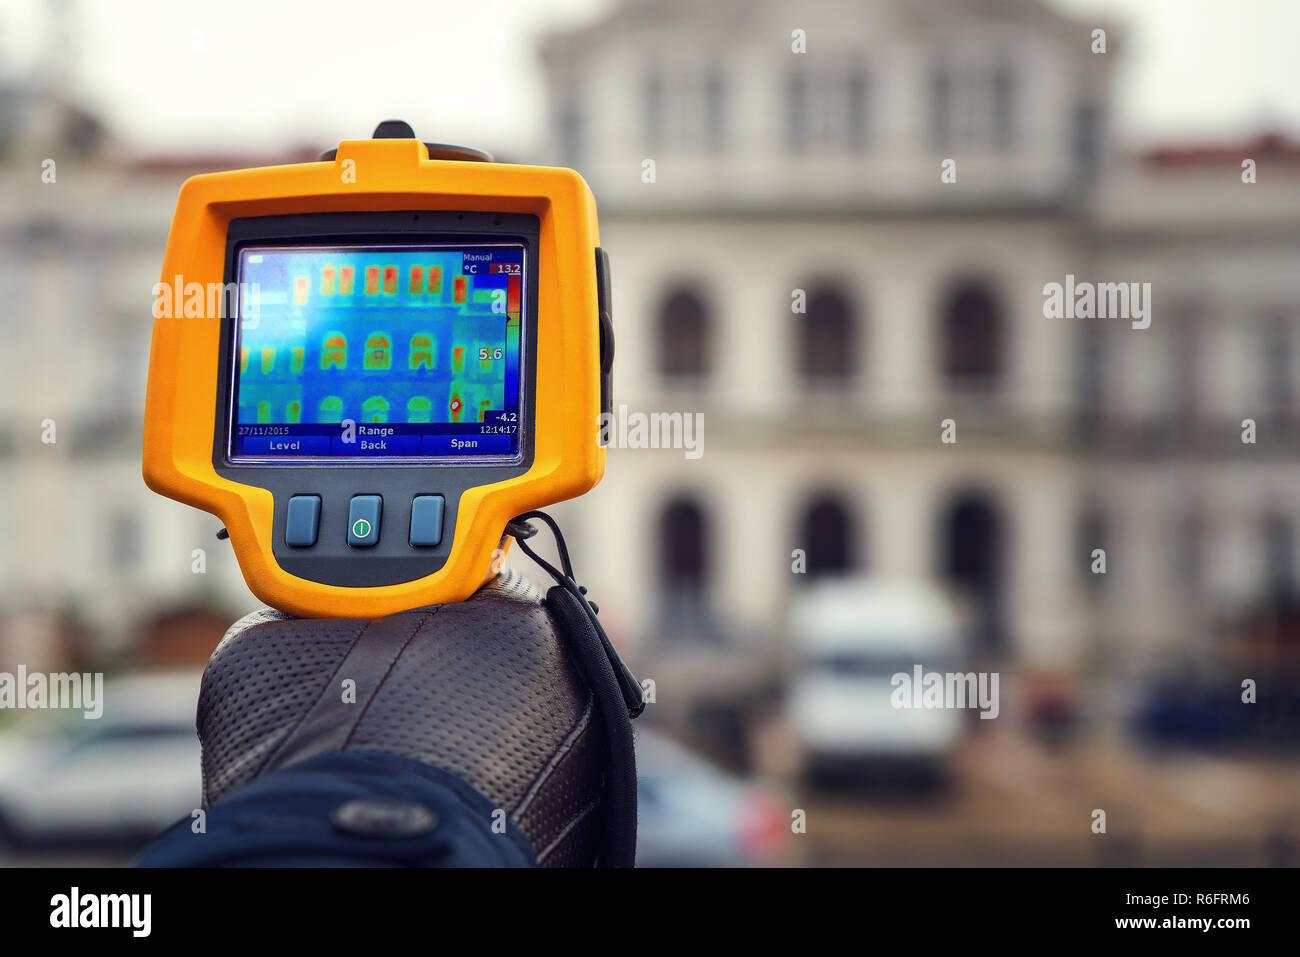 https://c8.alamy.com/comp/R6FRM6/heat-loss-inspection-infrared-thermal-camera-R6FRM6.jpg